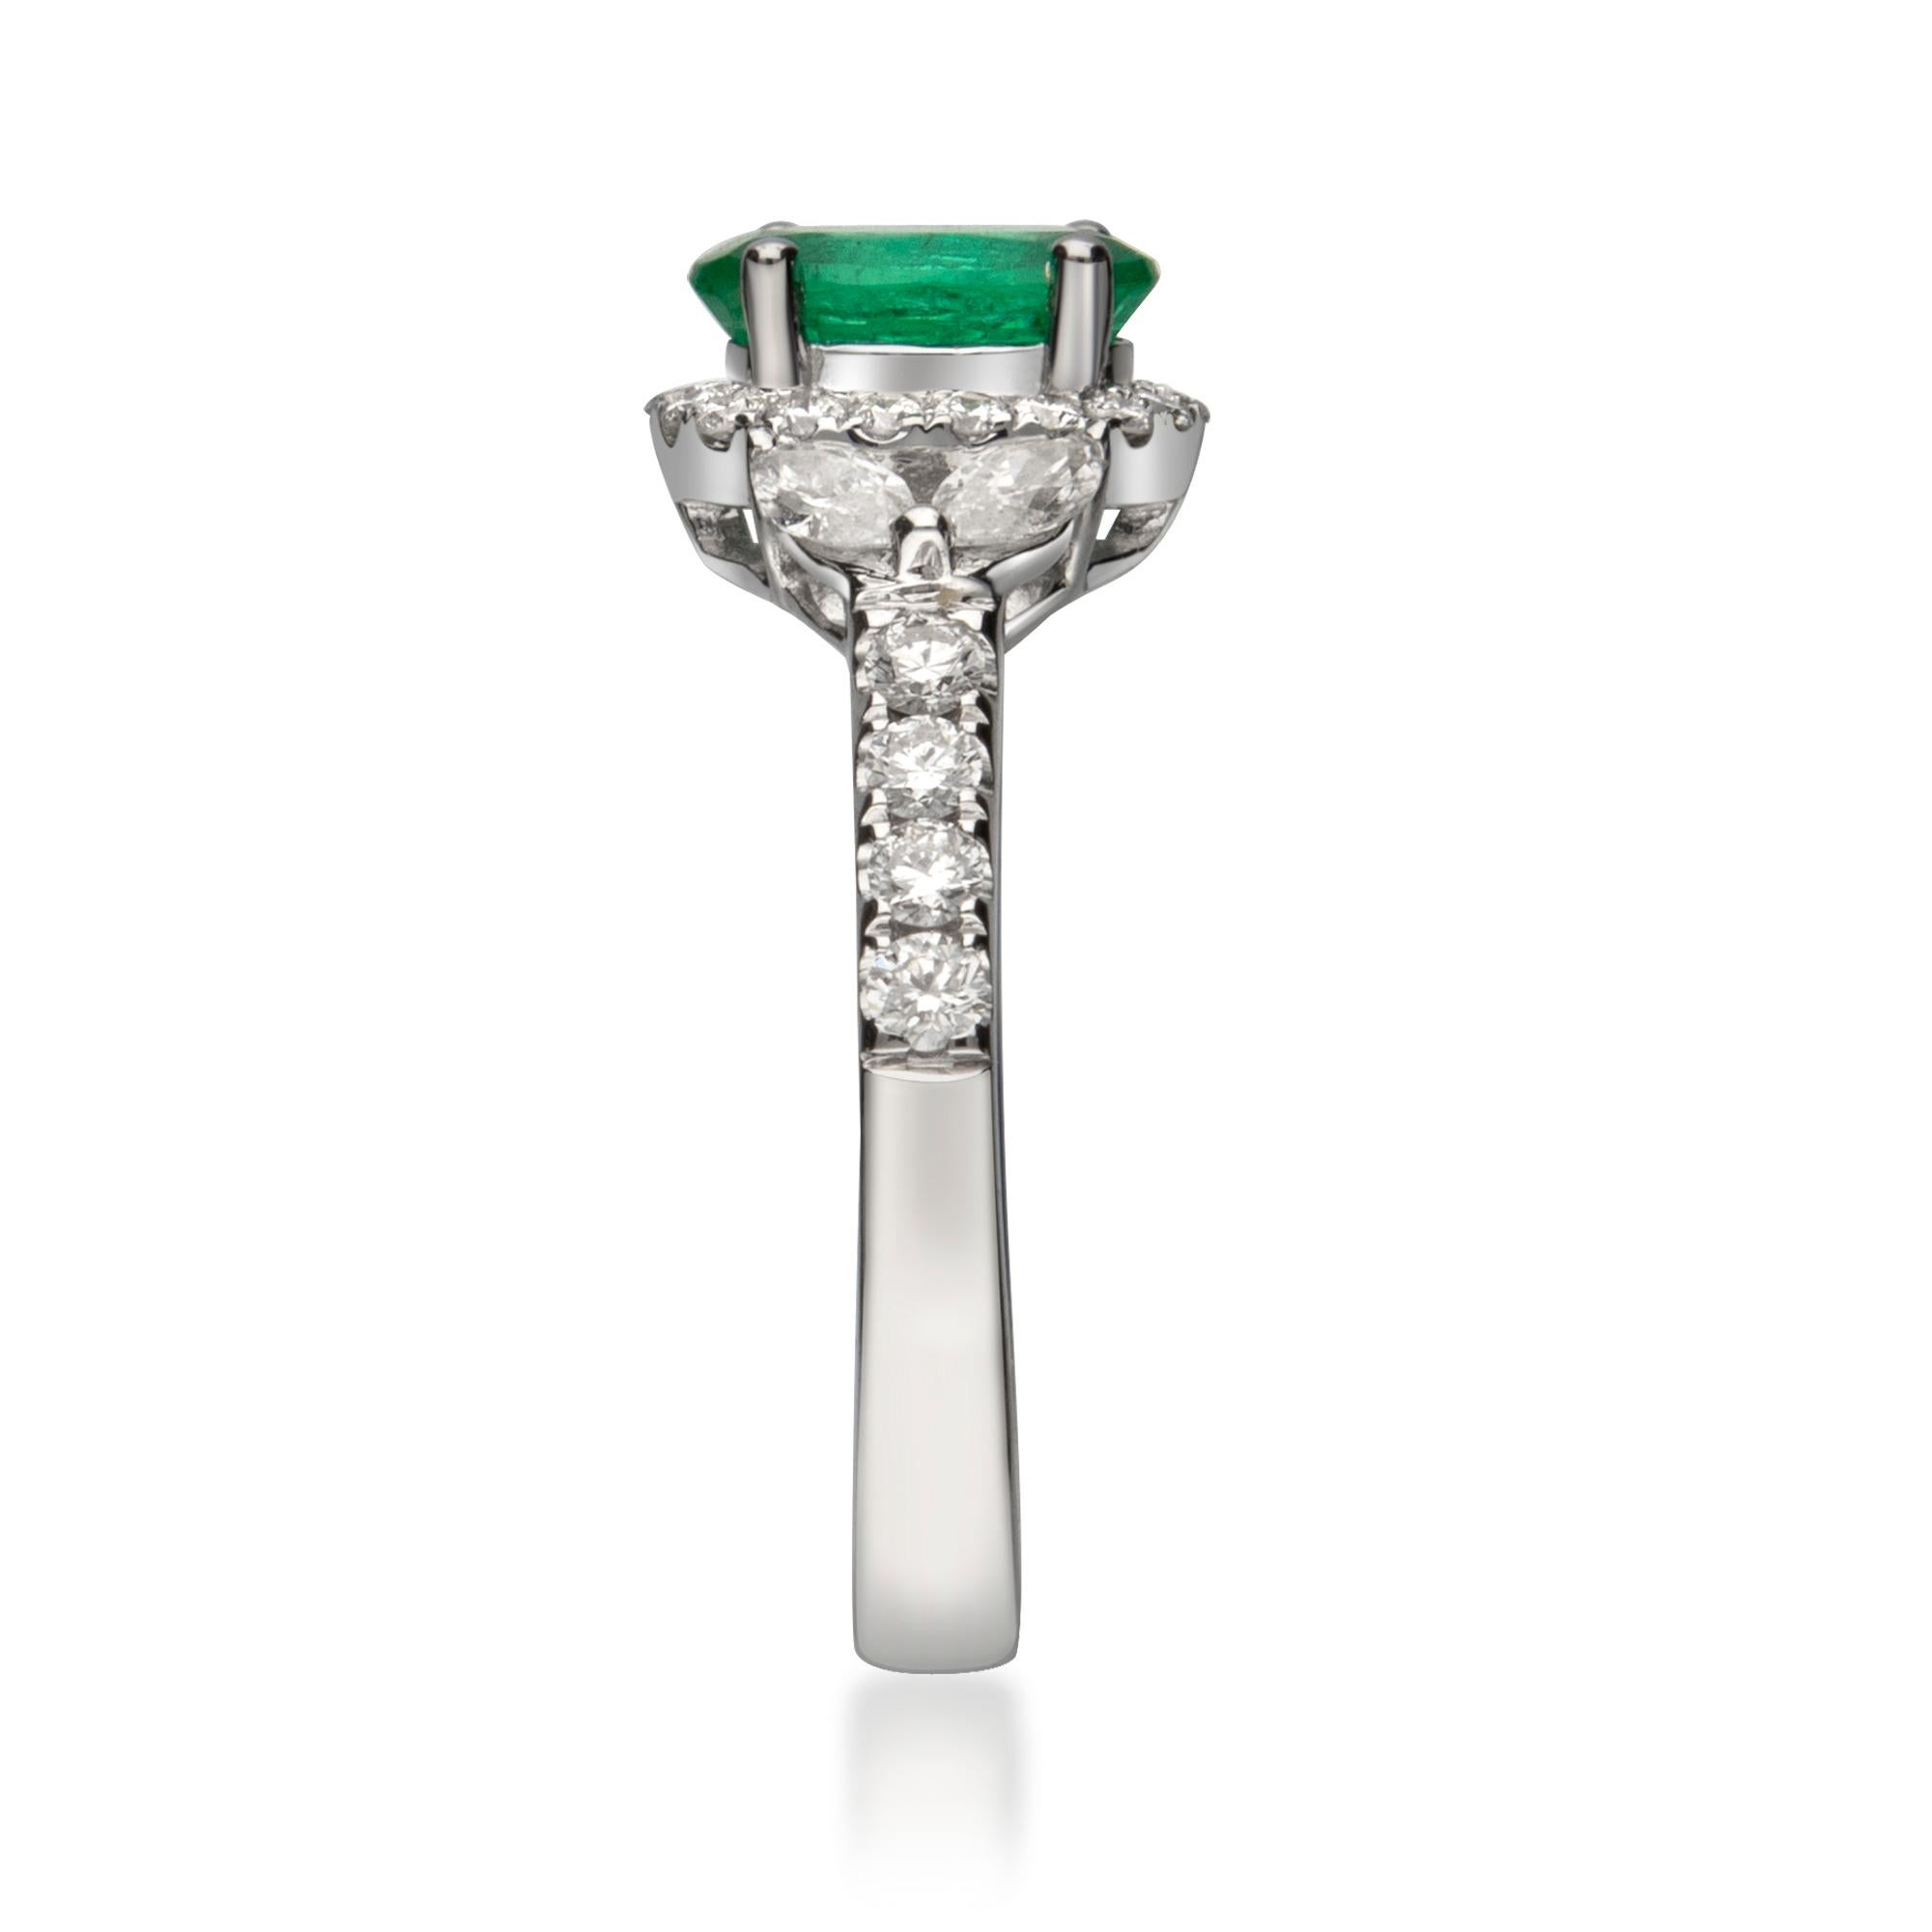 This beautiful Emerald Ring is crafted in 14-karat White gold and features a 1.07 carat 1 Pc Natural Emerald, 26 Pcs Round White Diamonds in GH- I1 quality with 0.40 Ct and 4 Pcs Marquise White Diamonds in GH- I1 quality with 0.31 Ct  in a